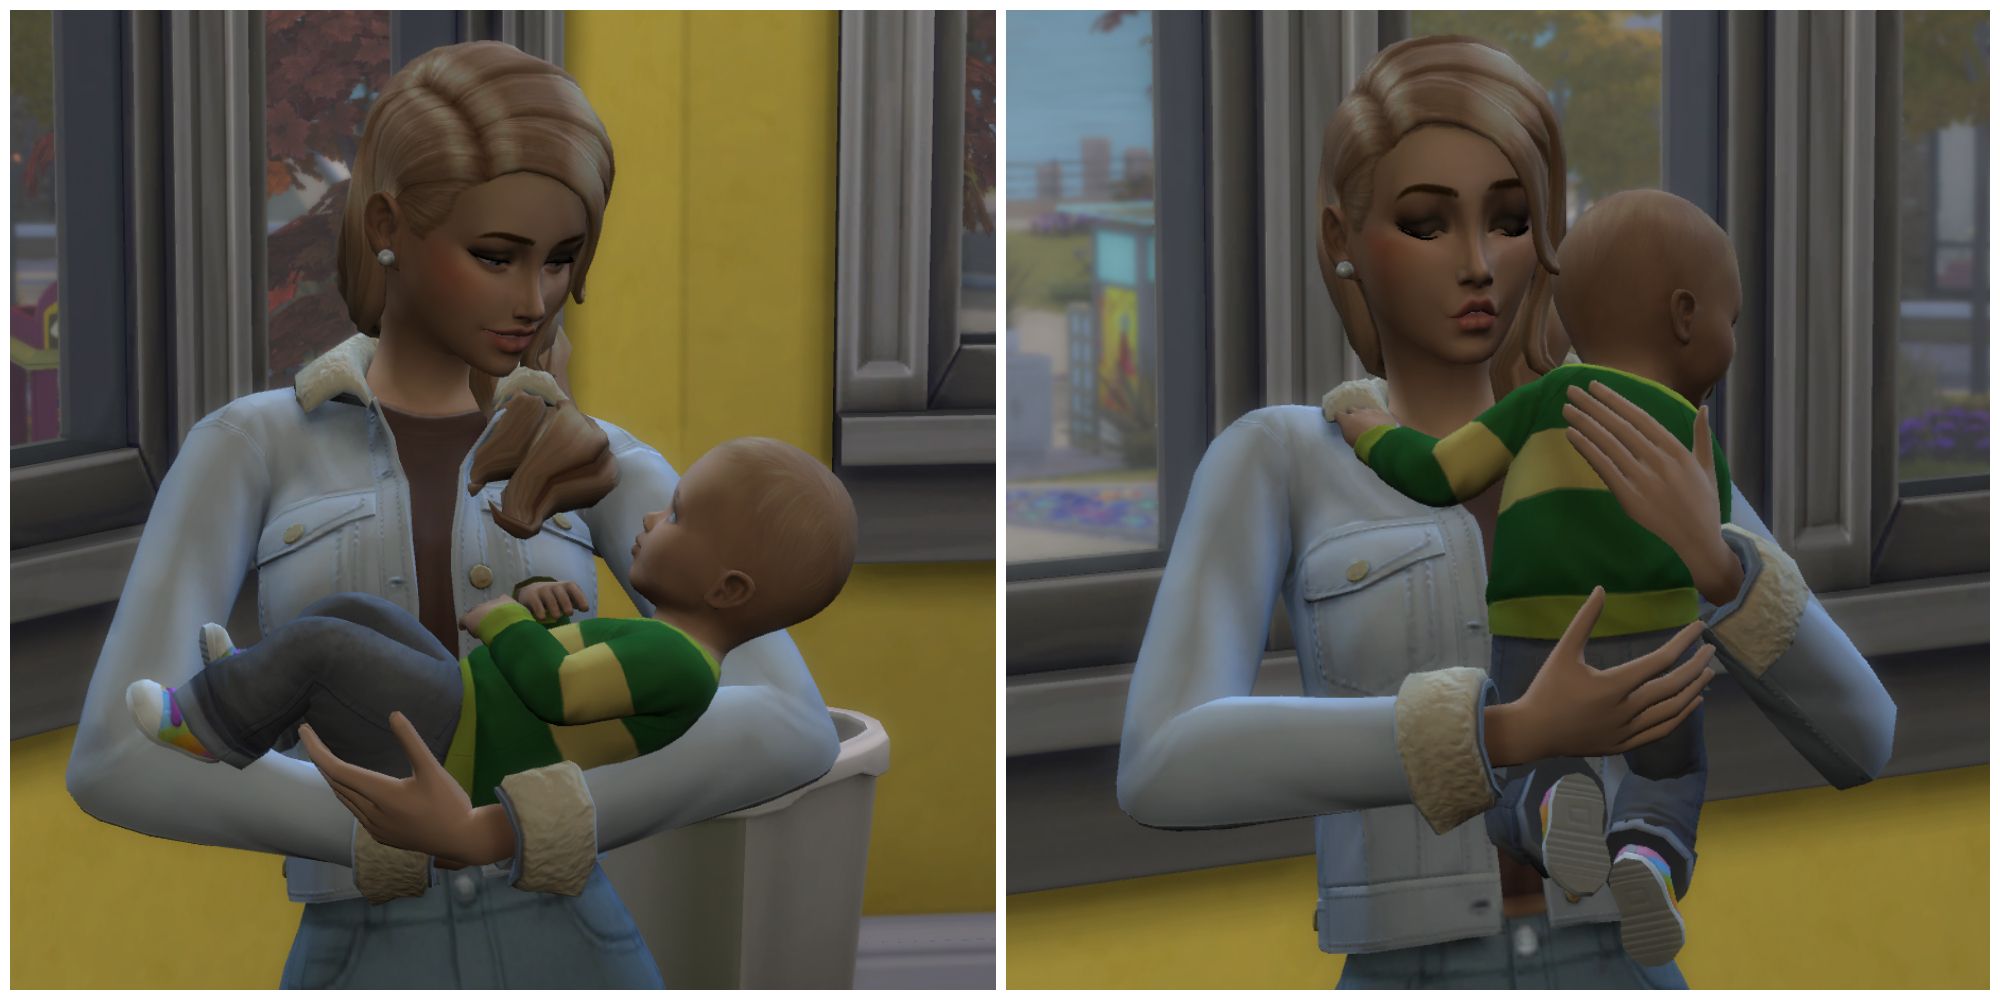 A single mother takes care of her infant son